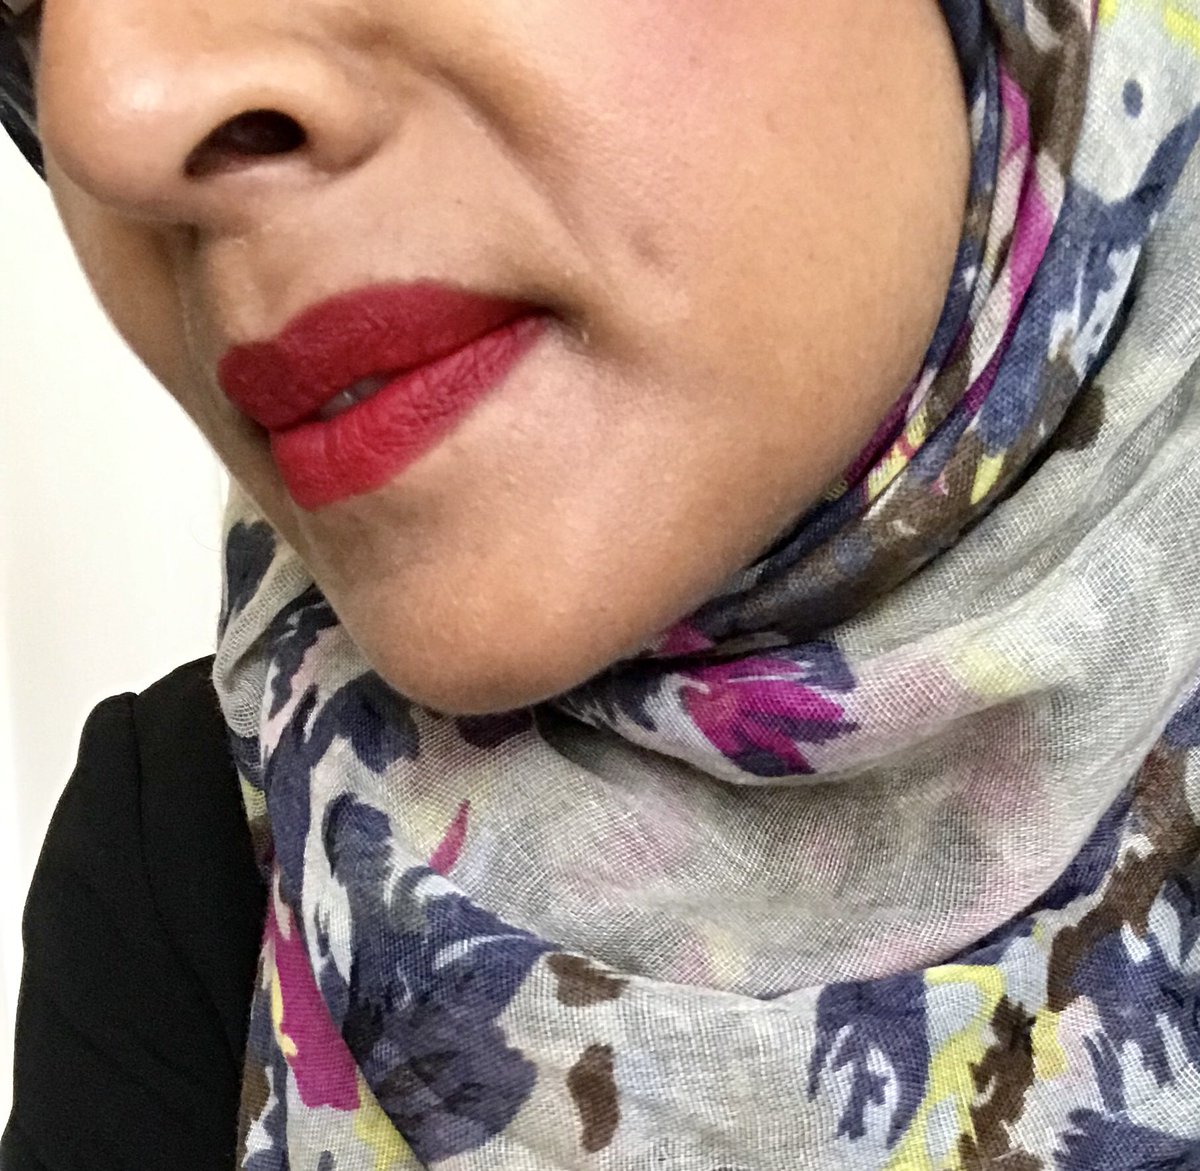 Absolutely the best red lipstick I have ever owned! The formulation is amazing. So hard to find the perfect red for my skin colour too. Thank you @LynnGreigMiller for the recommendation. I need them all now! 💄 @Lisa_Eldridge @Mummydoc1 @Liz_ORiordan @DrSdeG #lisaeldridgemakeup